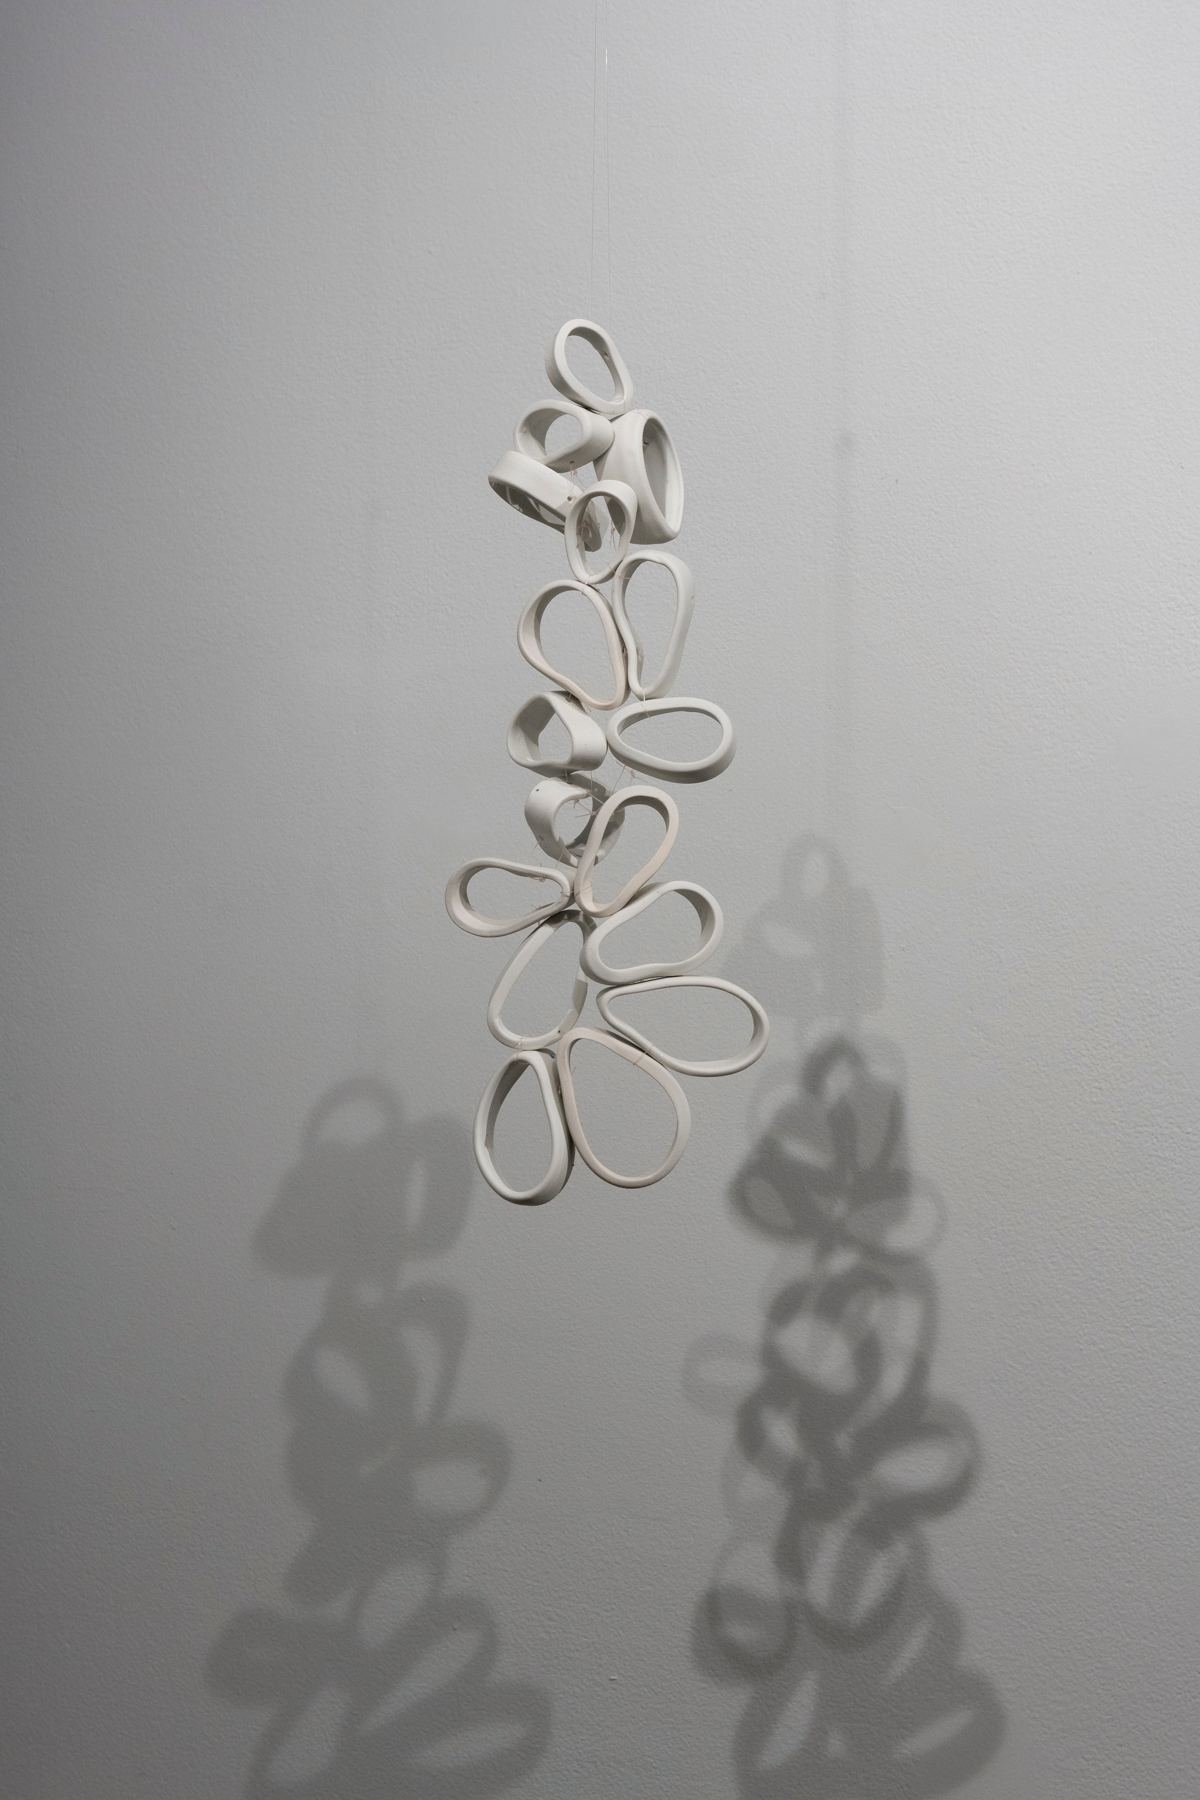 Detail image of a ceramic sculpture made of multiple hollow, oval shaped rings suspended from the ceiling